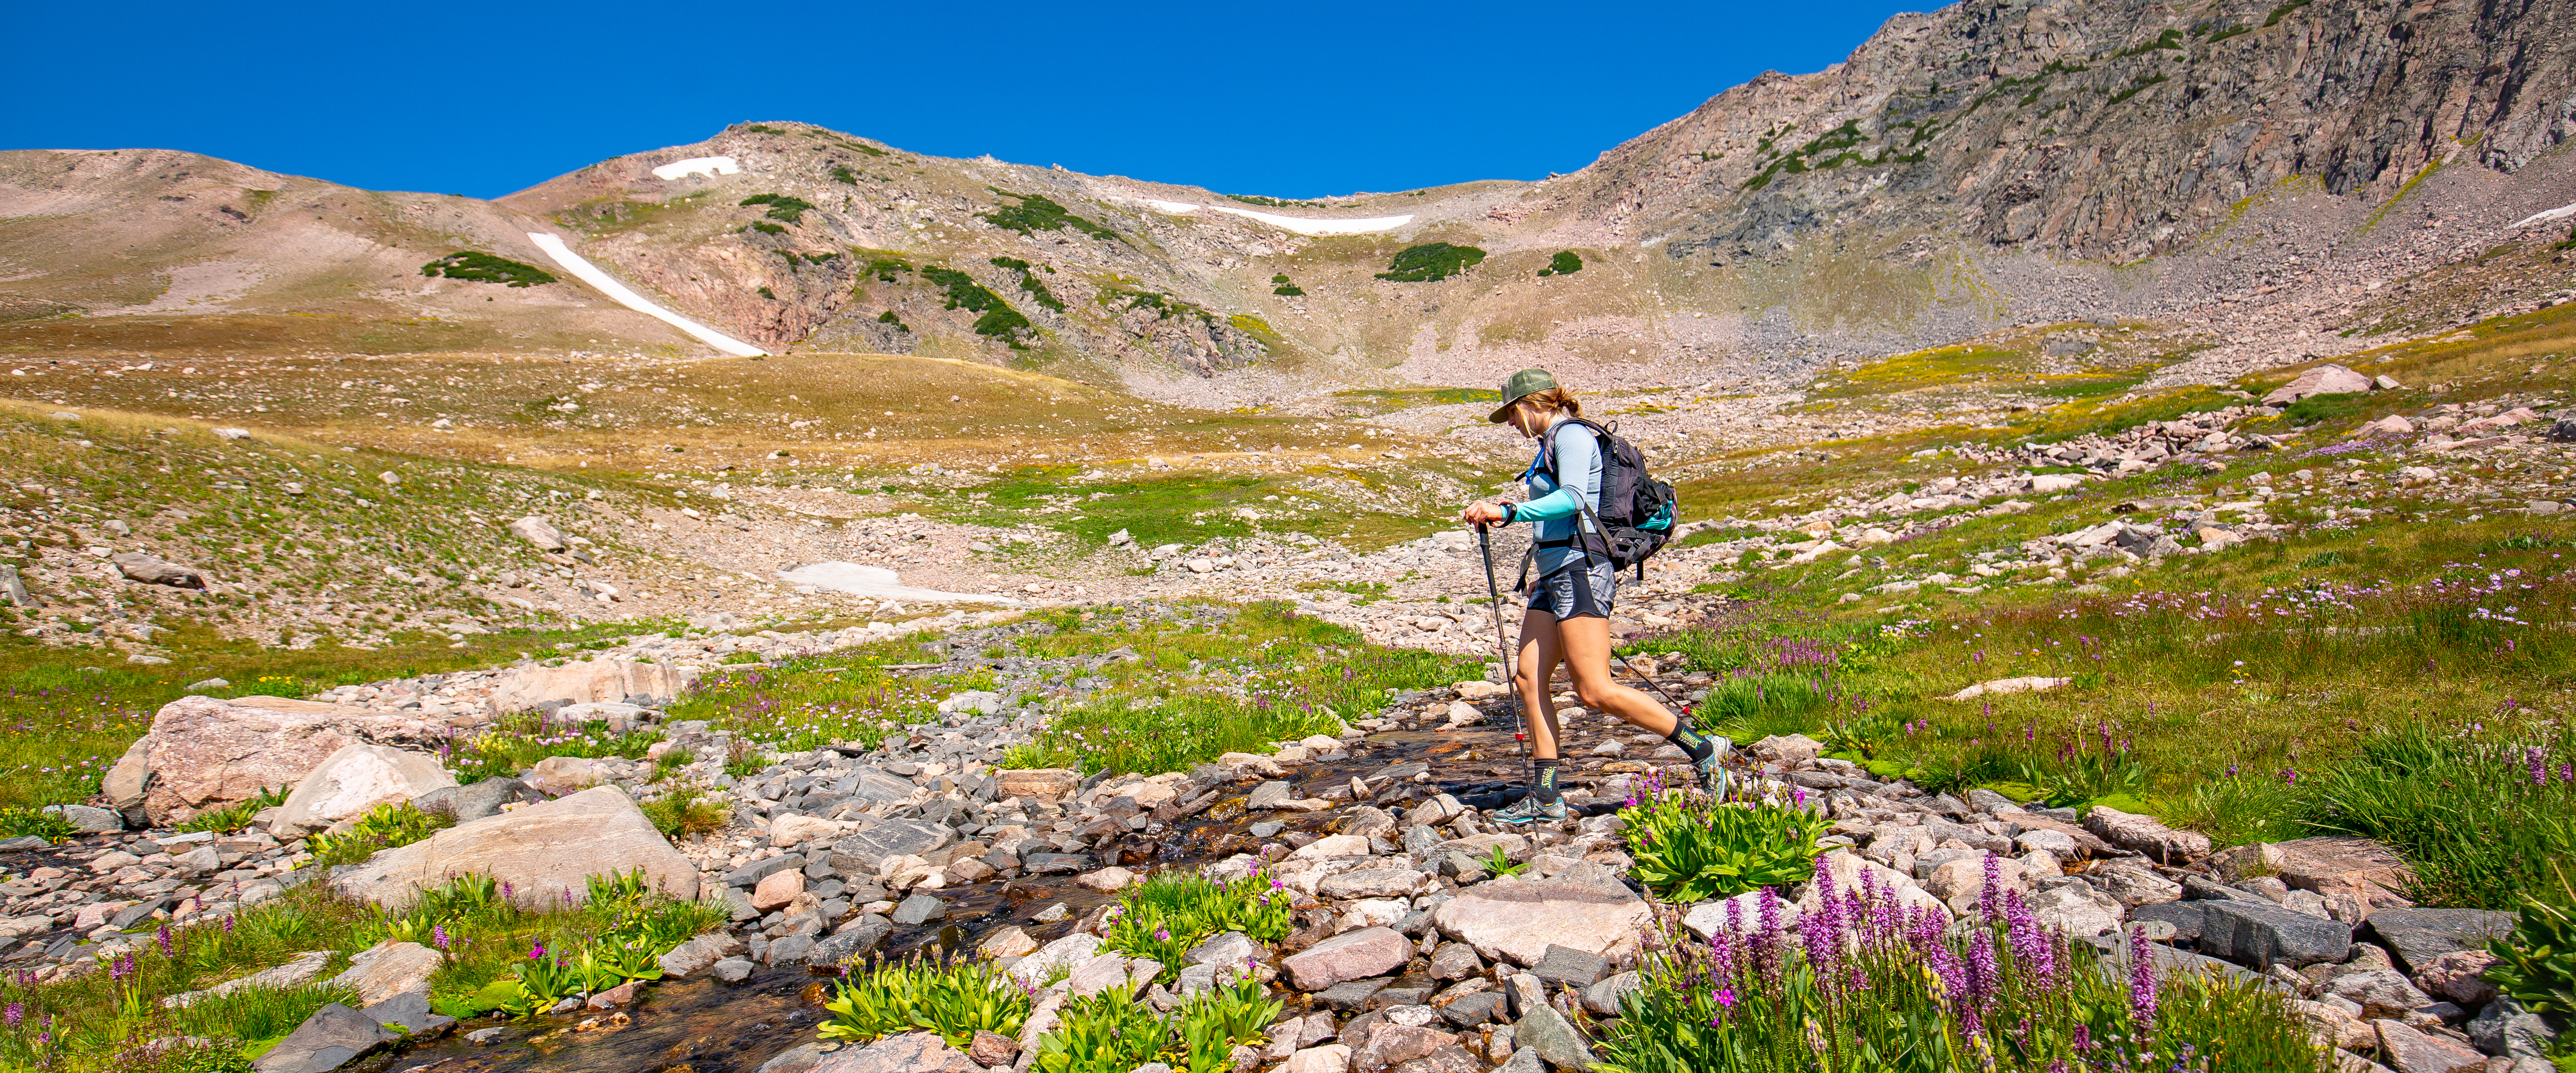 Summer Activities are endless in Steamboat Springs, Colorado